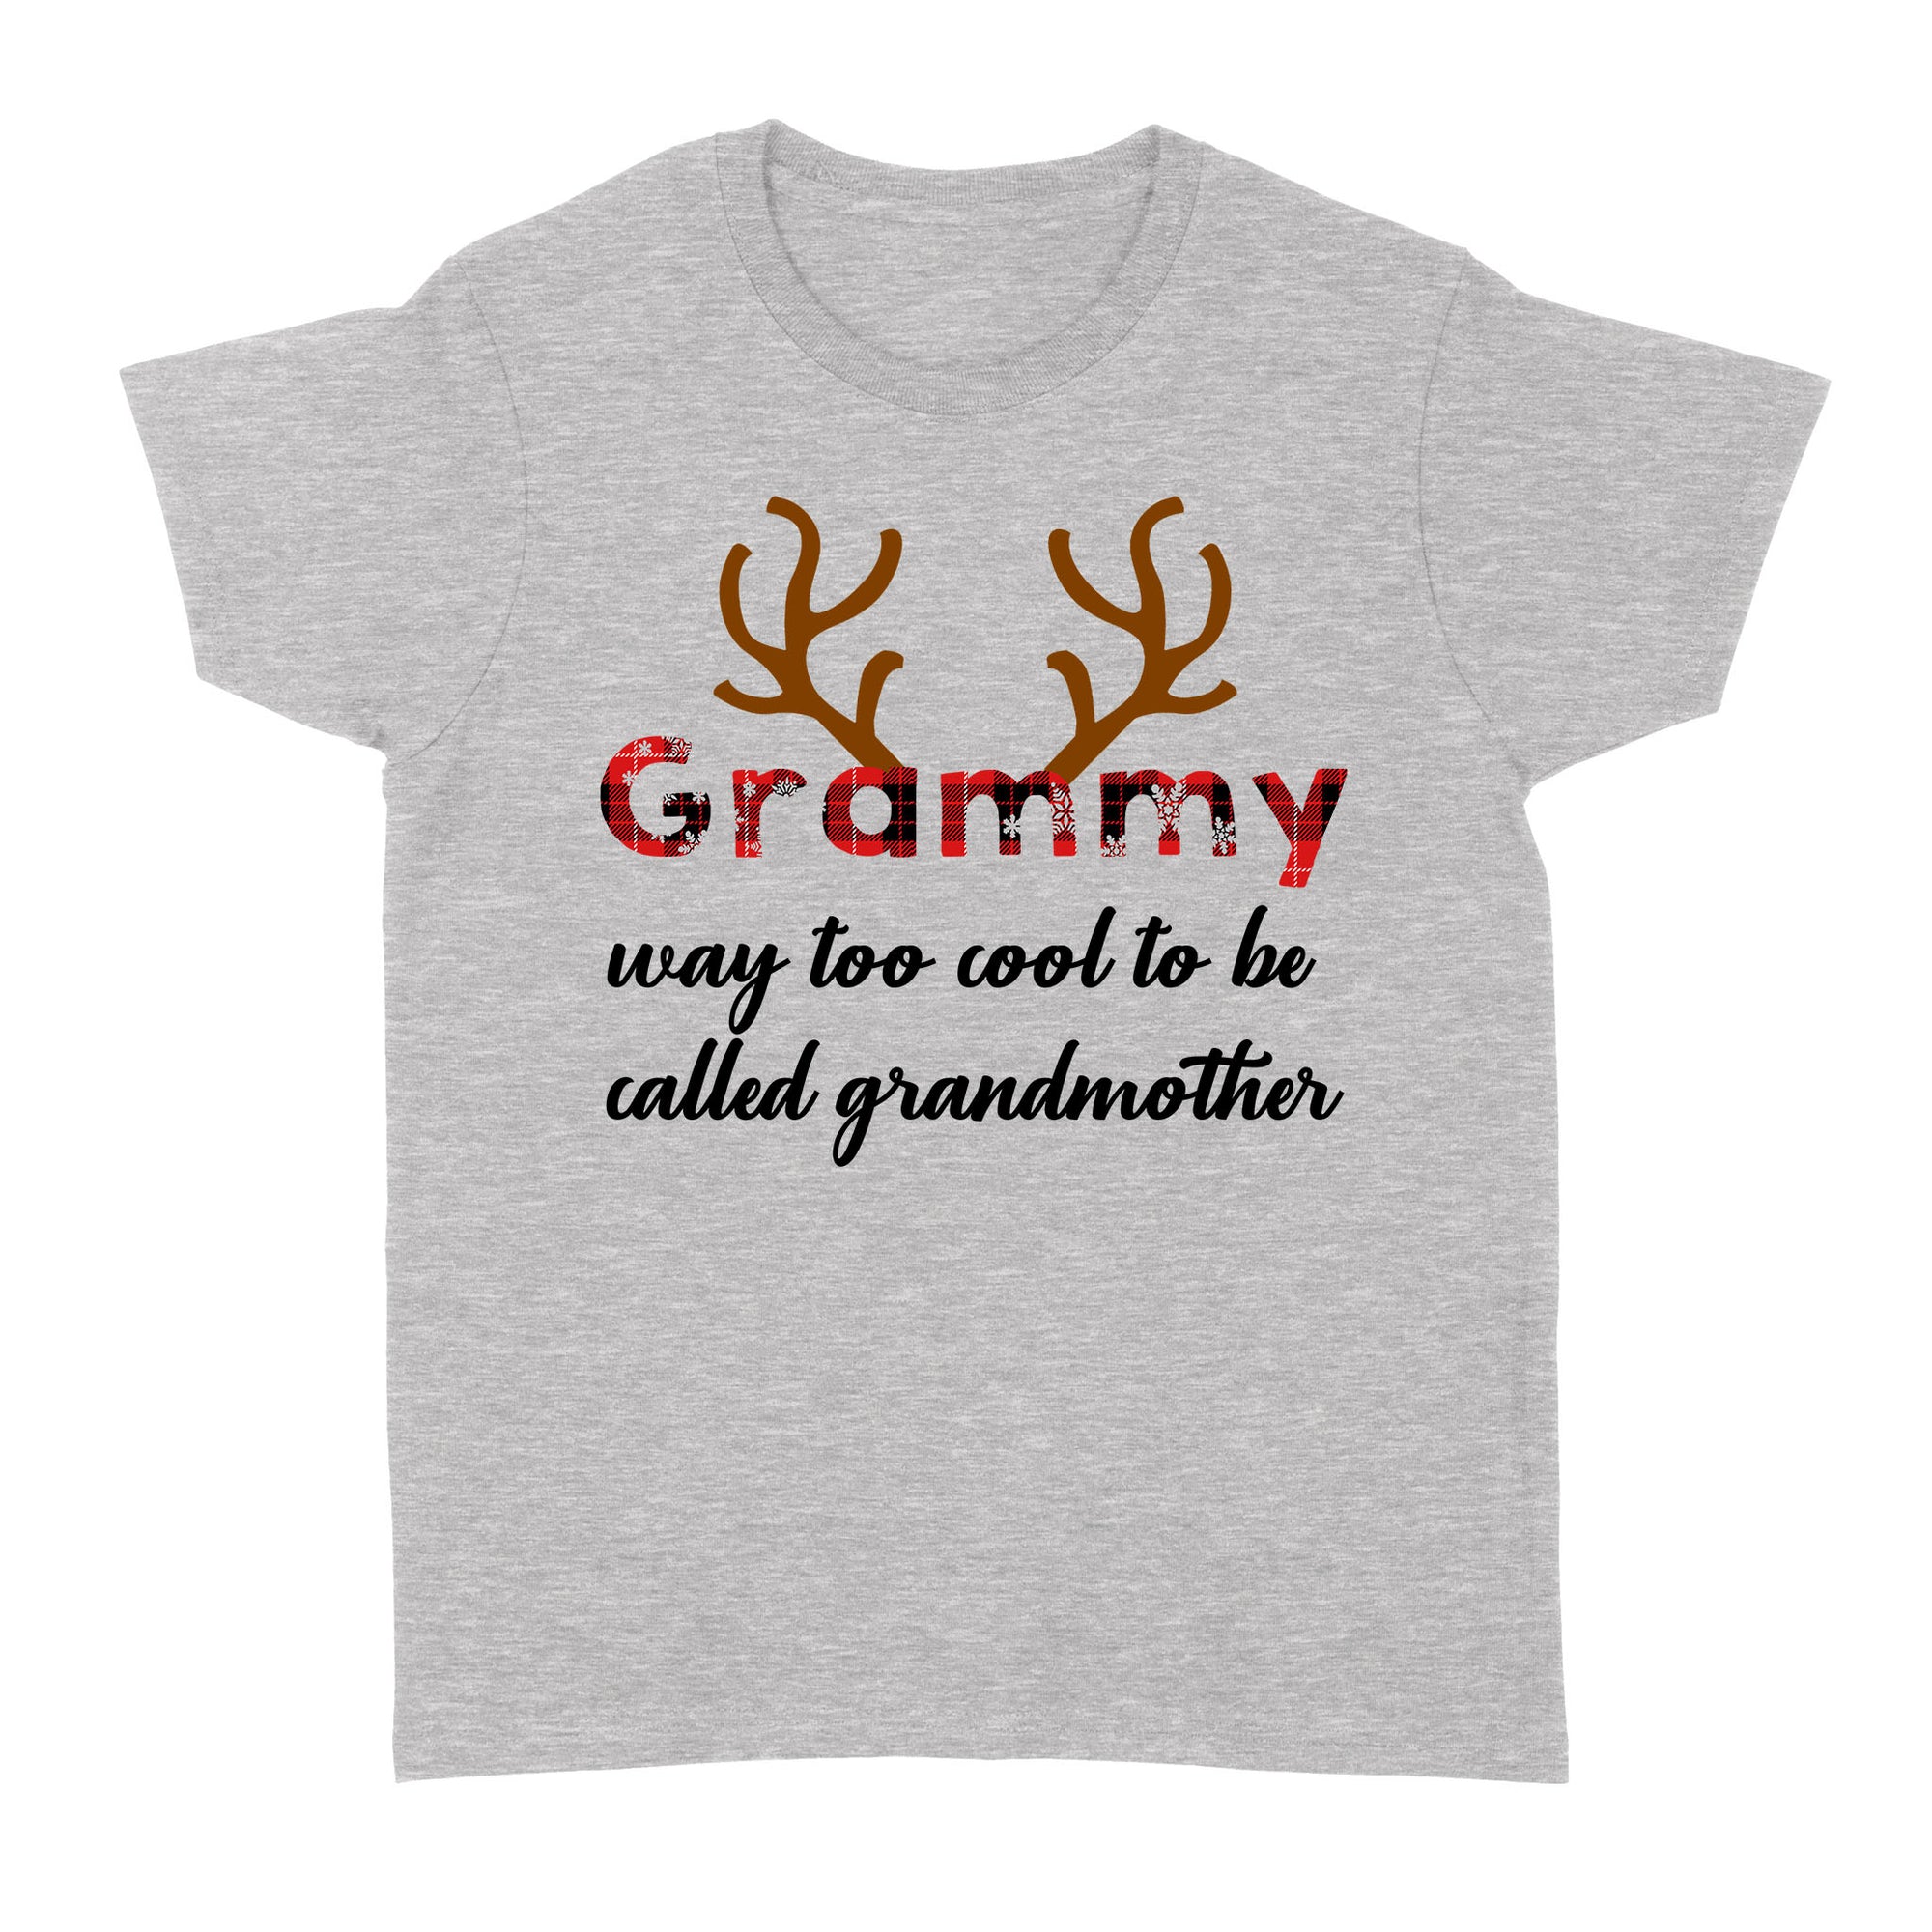 Funny Christmas Gifts Ideas for Grandma Grammy Way Too Cool To Be Called Grandmother Deer Christmas Xmas - Standard Women's T-shirt